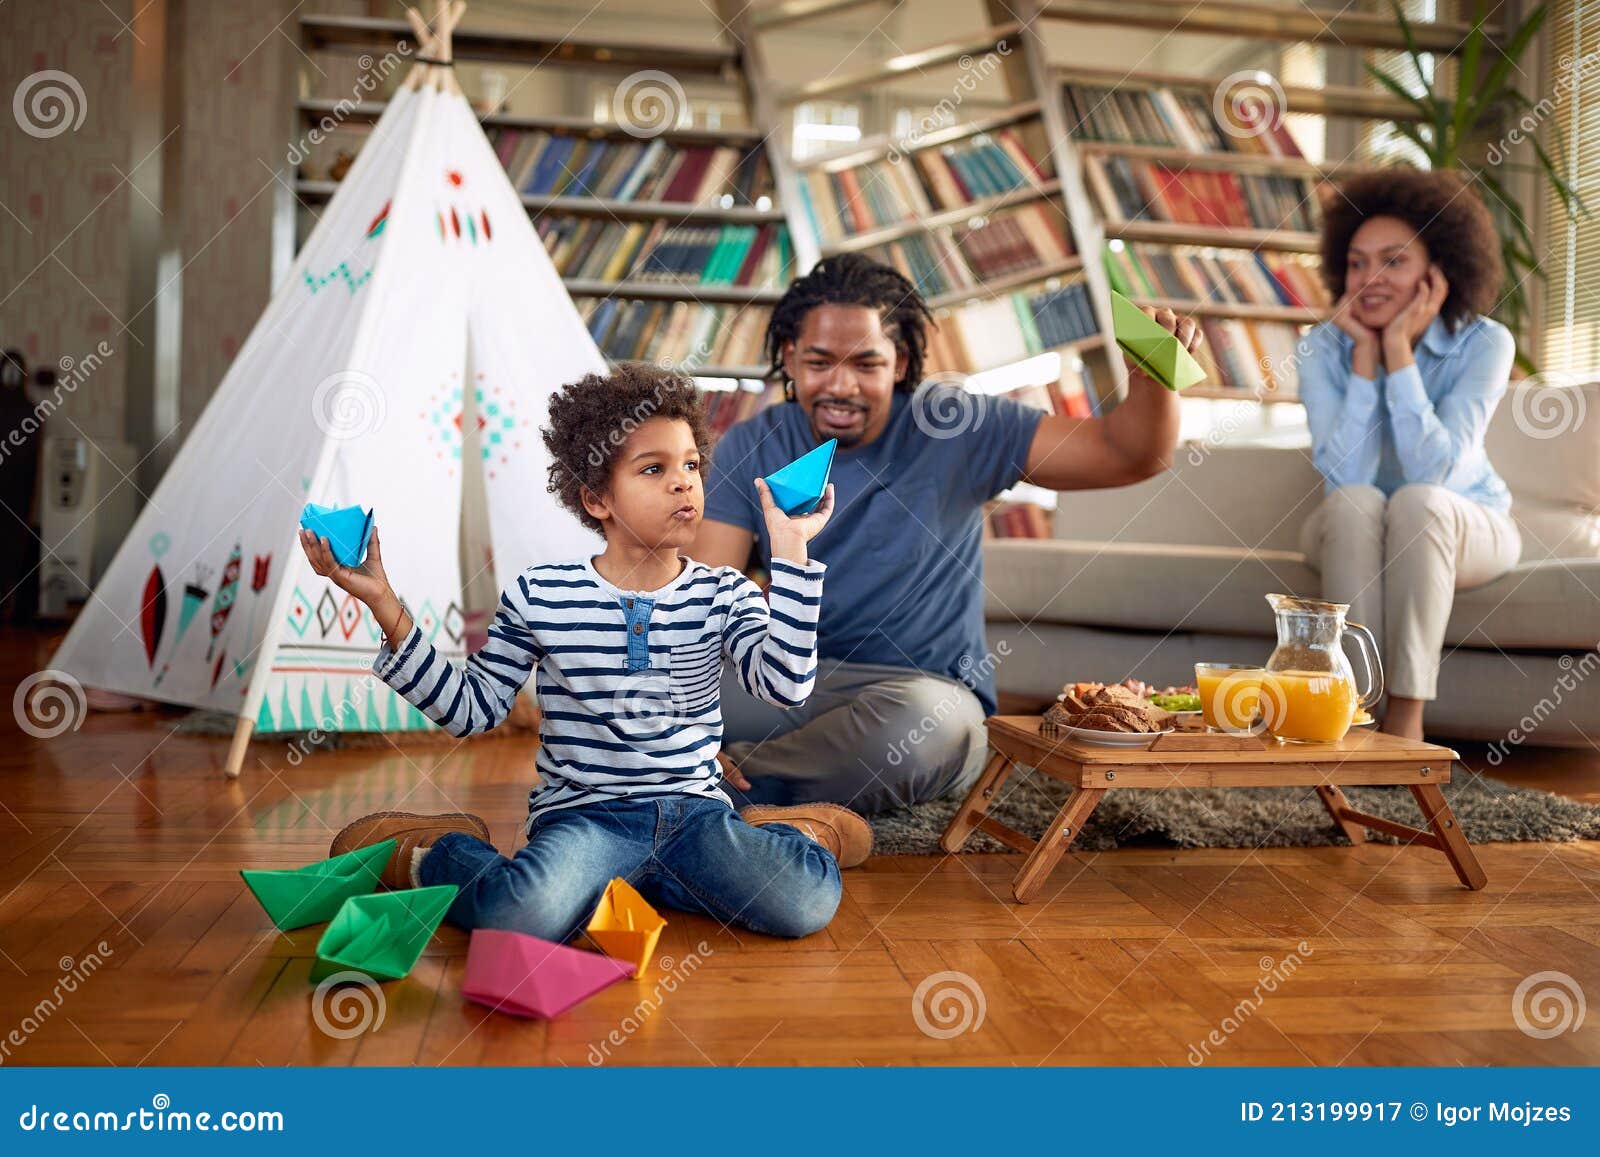 happy family enjoying free time at home together. family, together, love, playtime